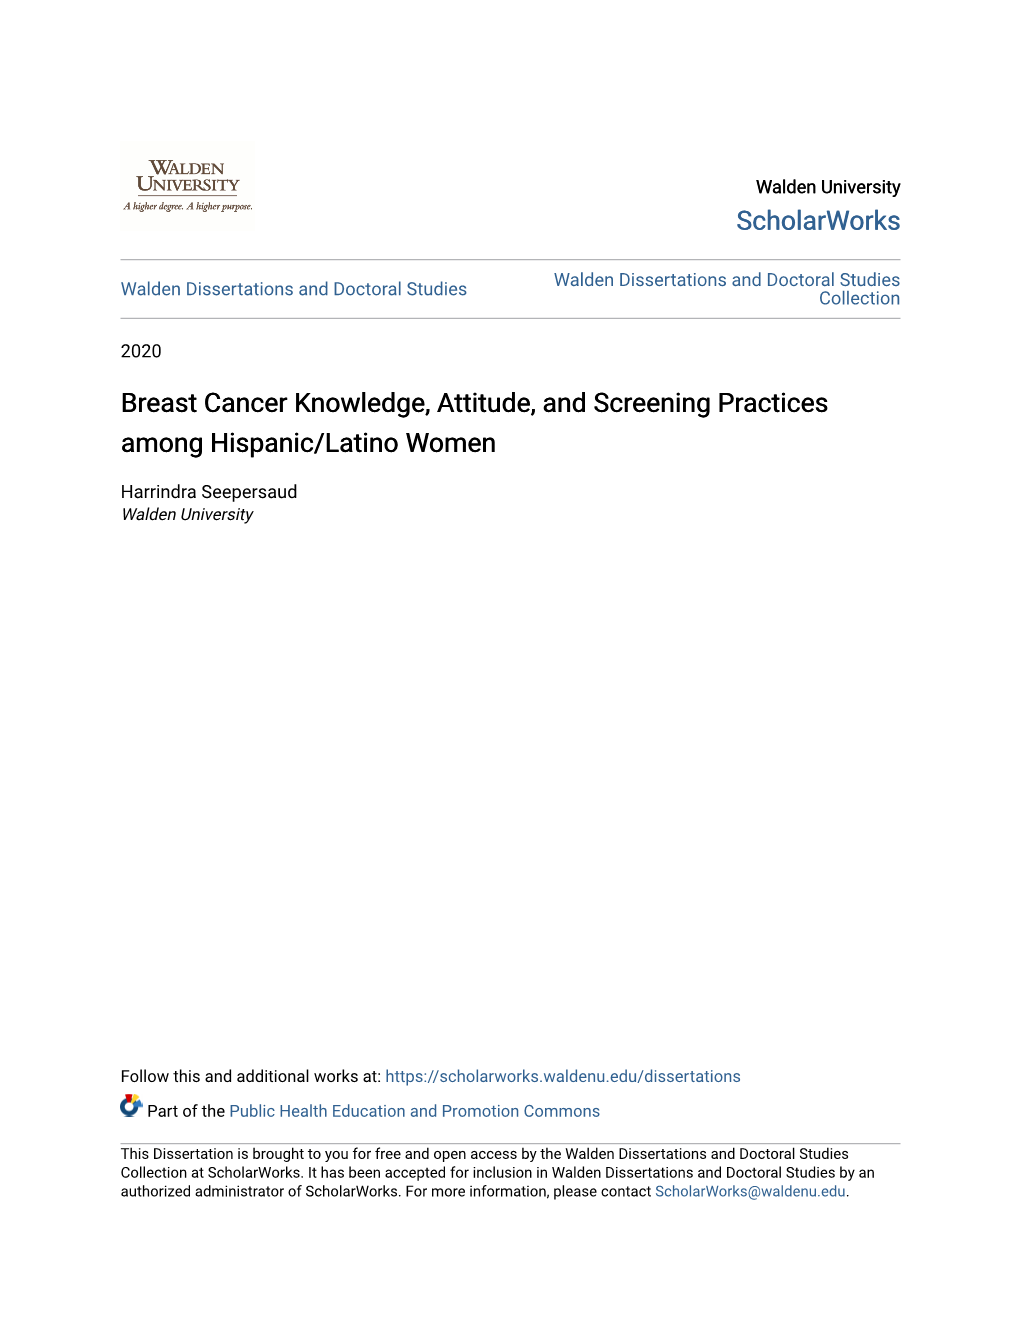 Breast Cancer Knowledge, Attitude, and Screening Practices Among Hispanic/Latino Women